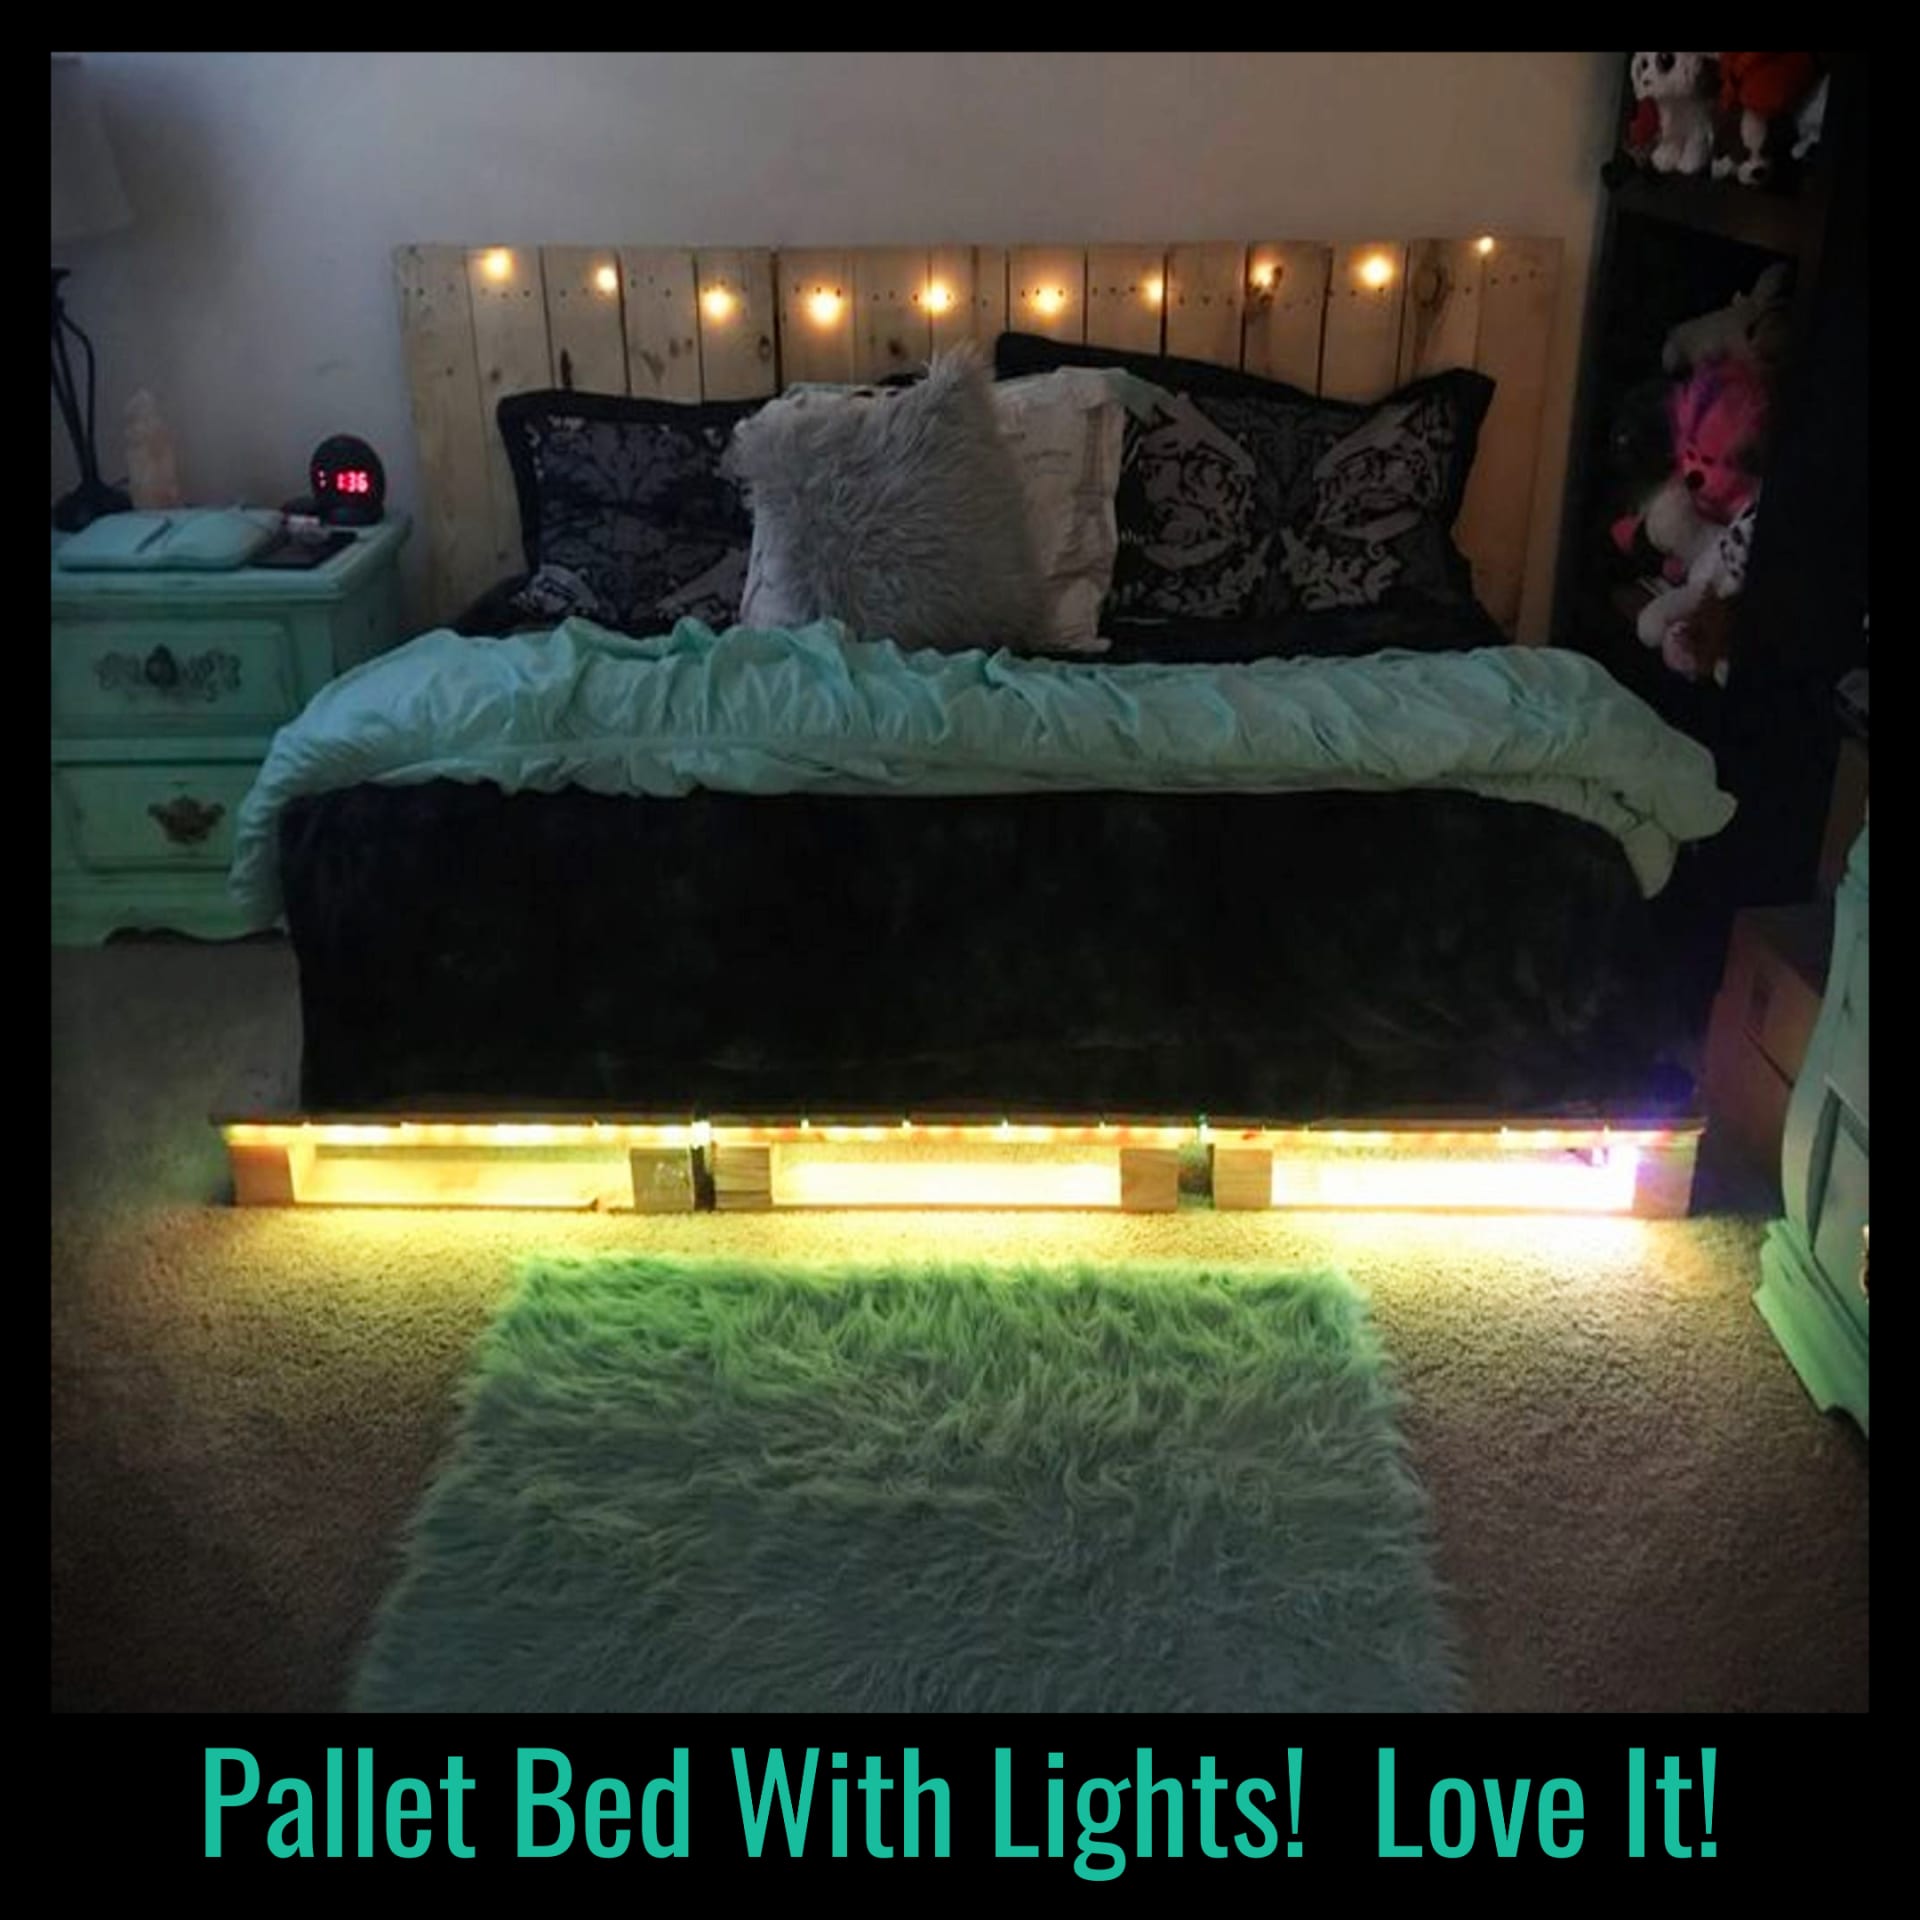 Pallet projects - easy DIY pallet furniture projects - Pallet bed with lights!  How to make a pallet bed and other simple pallet projects to make or sell for beginners